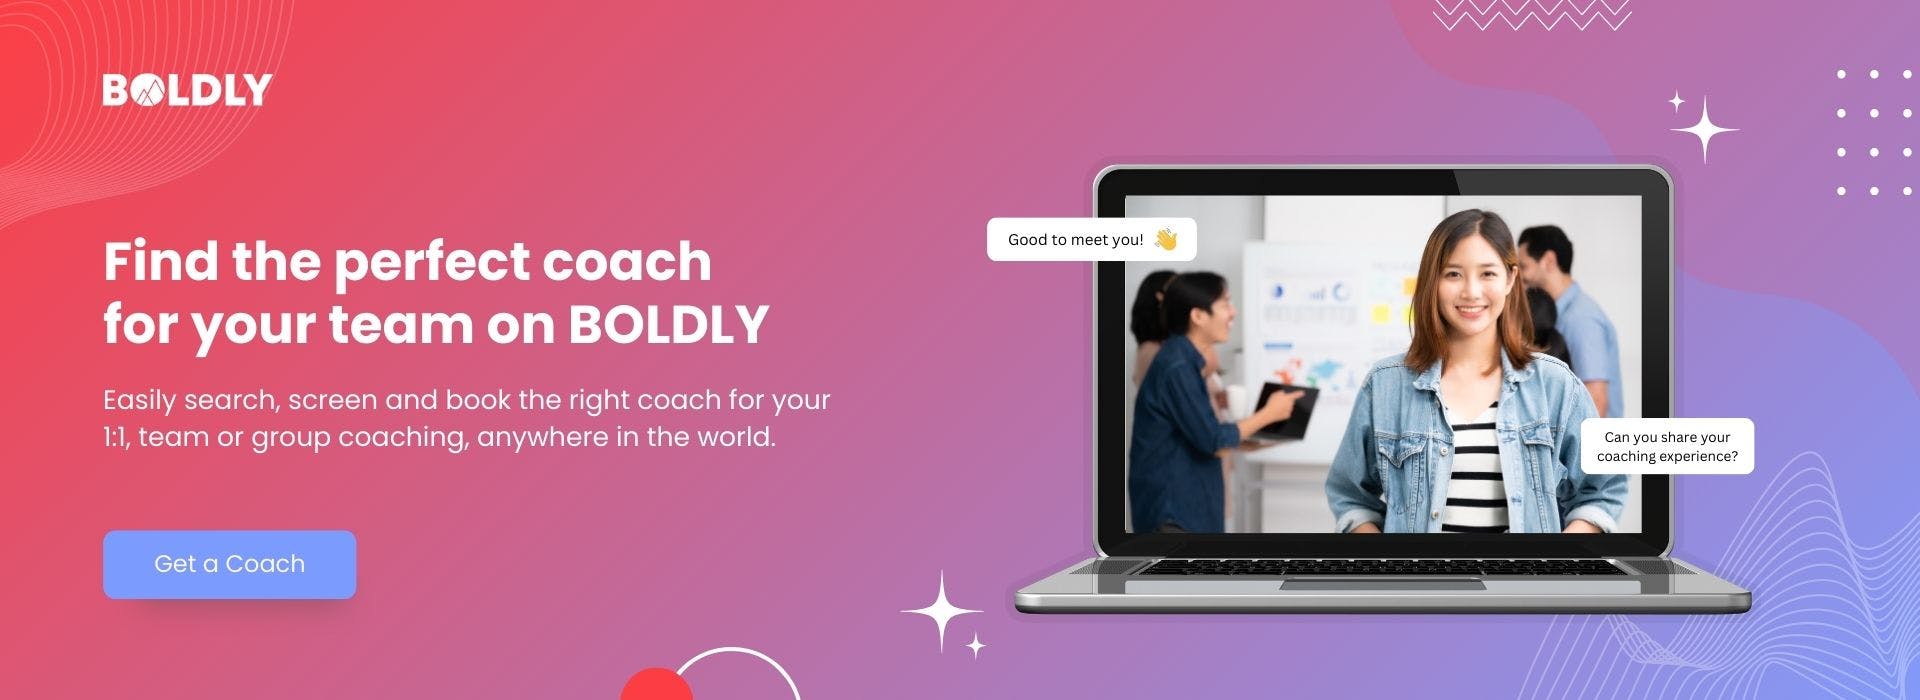 BOLDLY is the largest marketplace for vetted and qualified coaches 